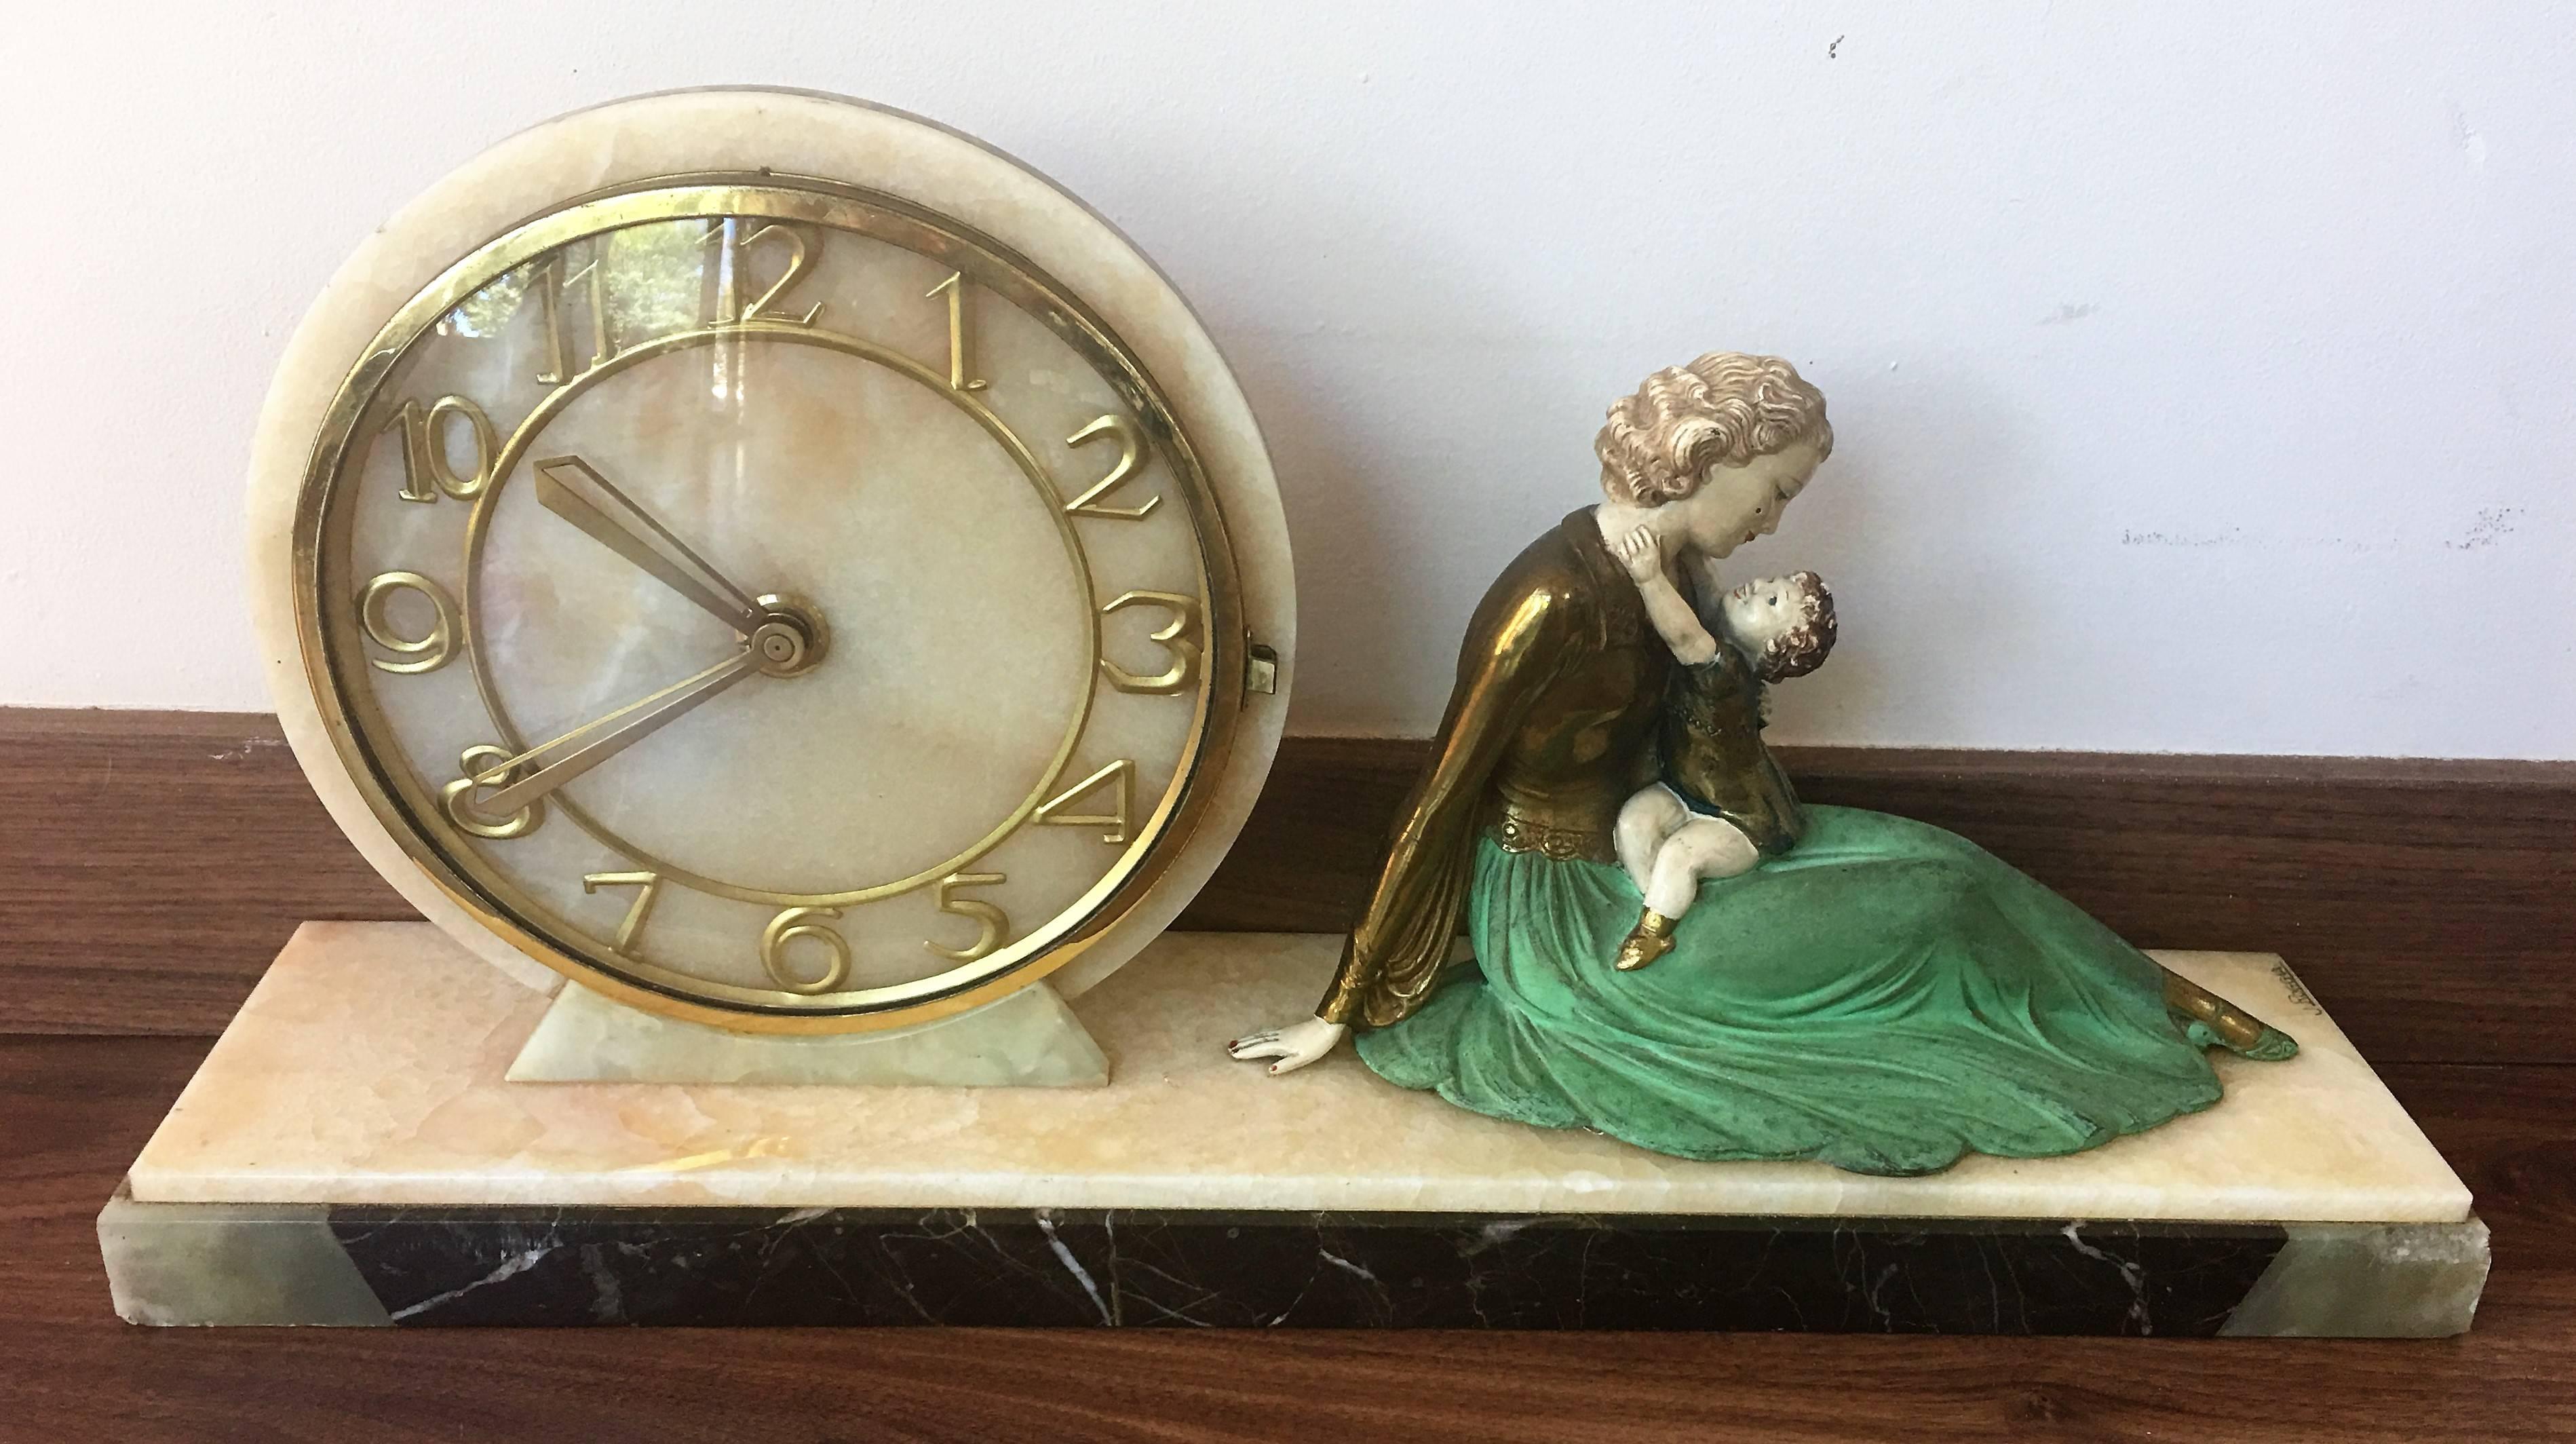 Art Deco clock with figurine, circa 1920
This marble based clock was produced in Paris in the early 1920s.
The figurine is bronze-plated cold painted spelter with fine detail

